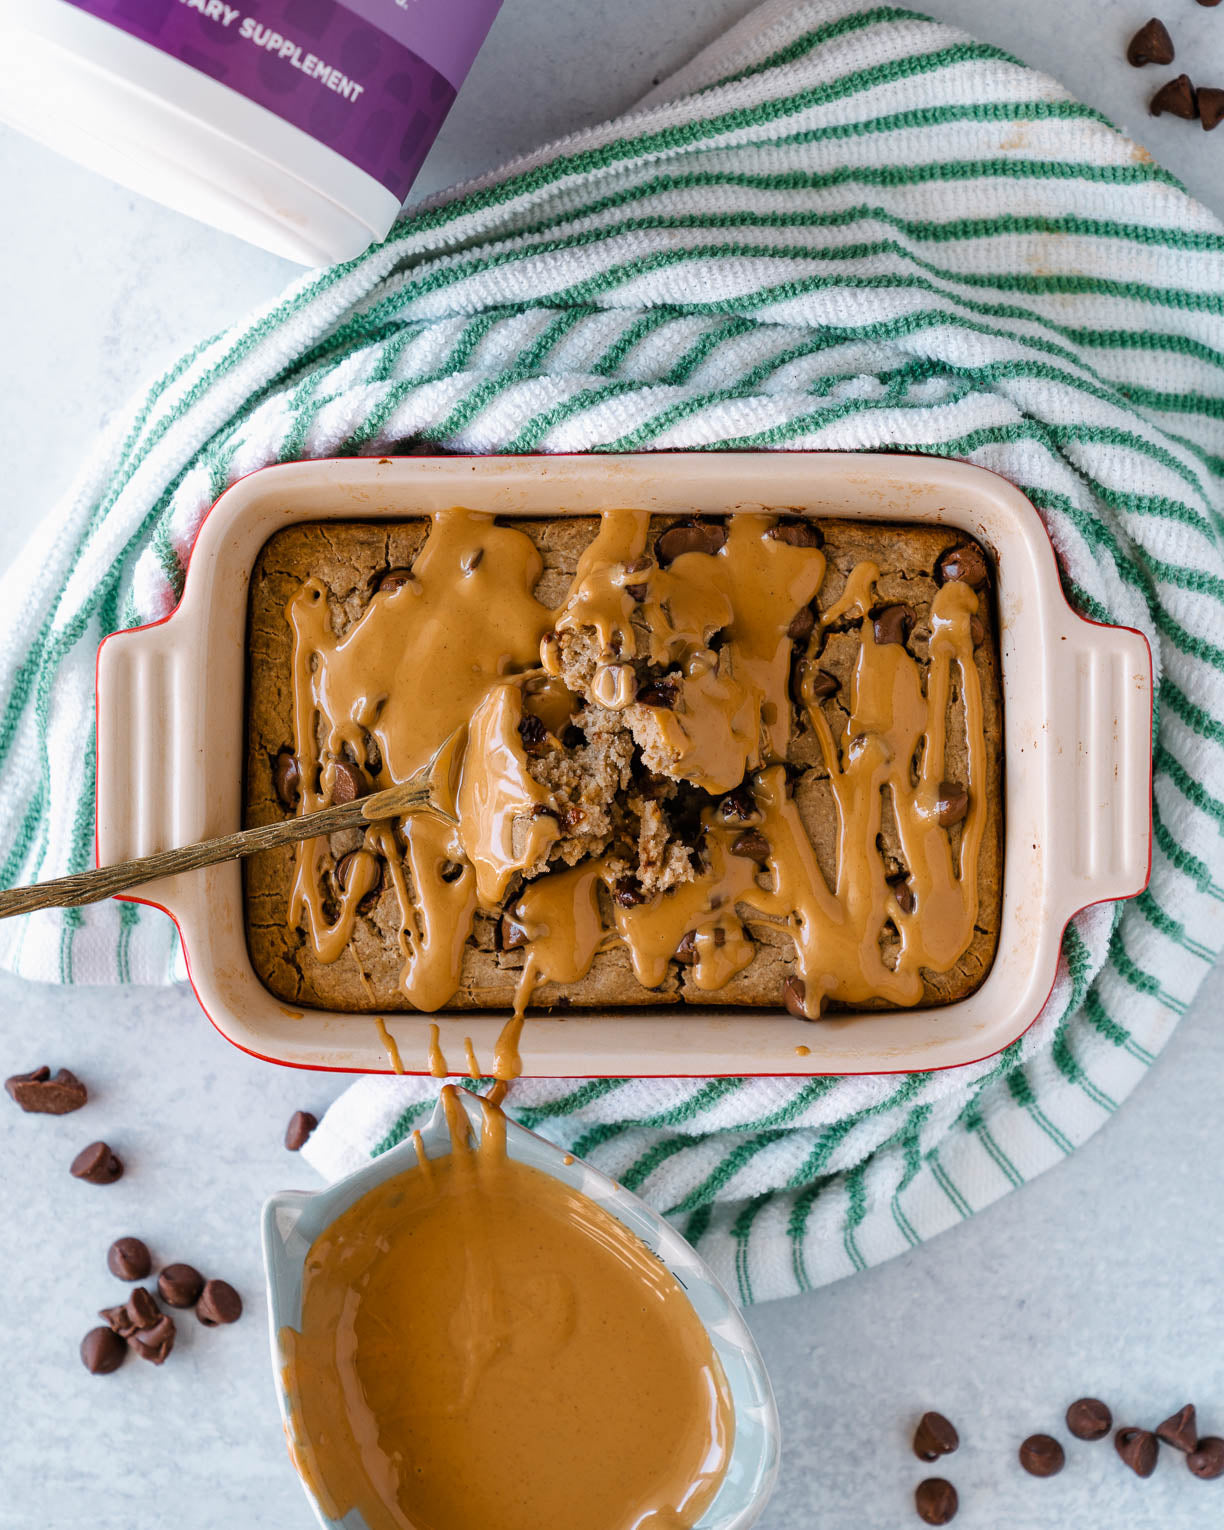 Peanut Butter Chocolate Chips High Protein Baked Oats